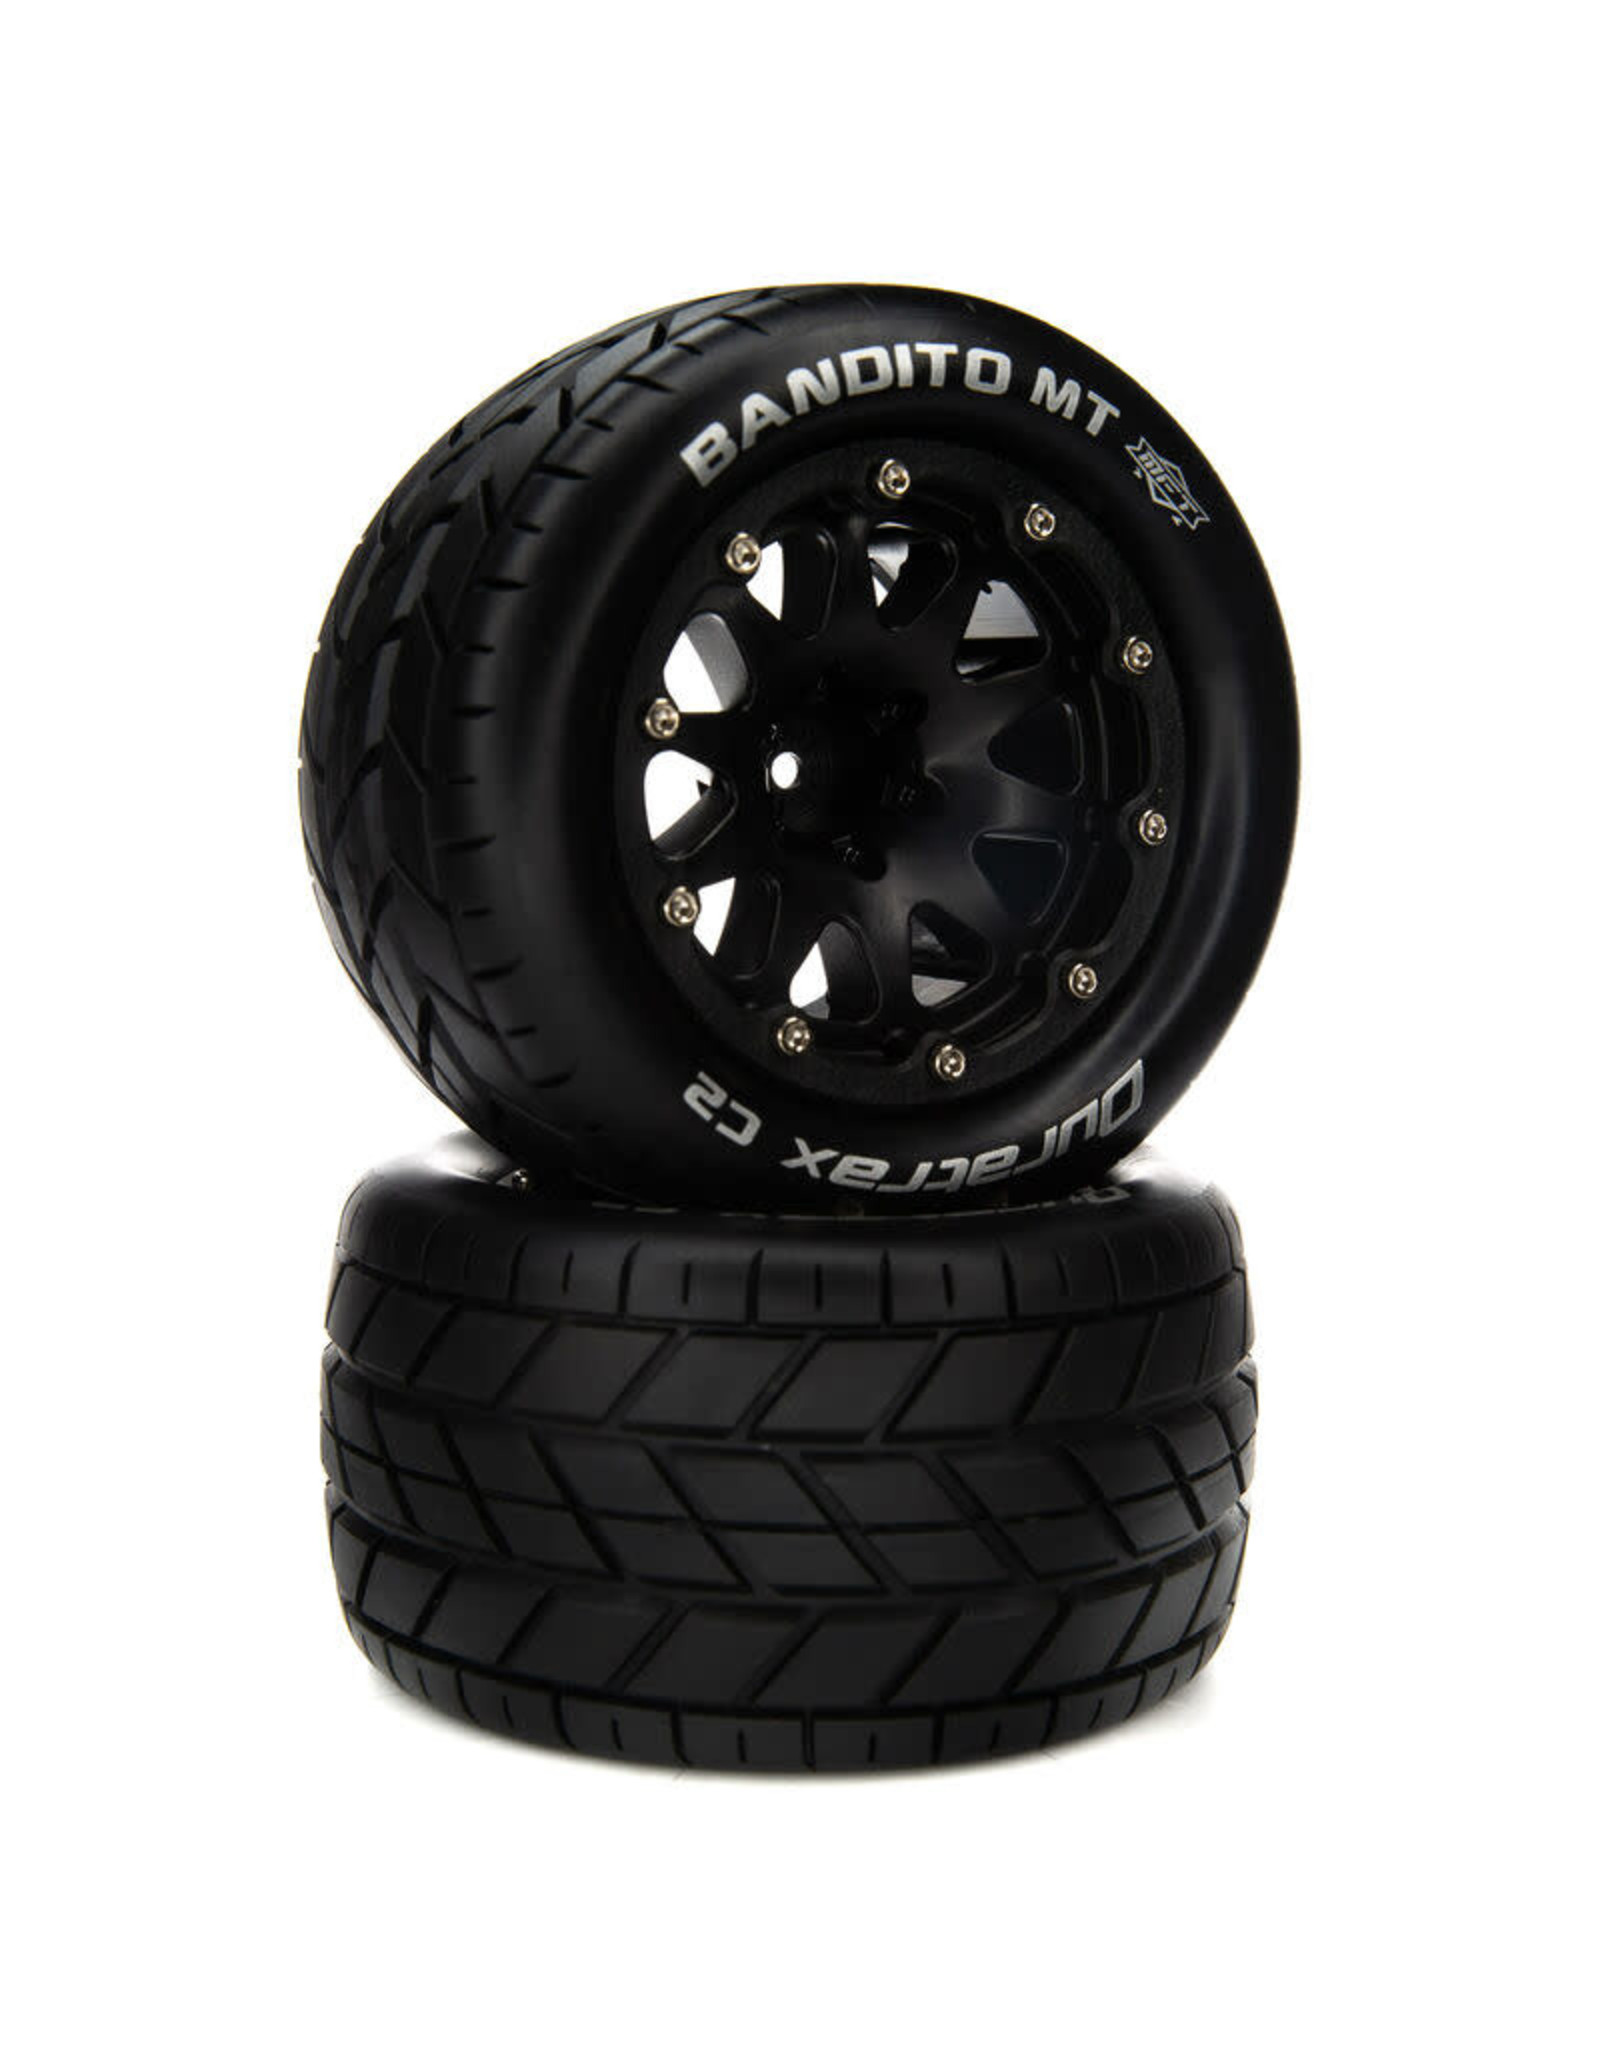 Duratrax Bandito MT Belted 2.8" Mounted Front/Rear Tires, 14mm Black (2)